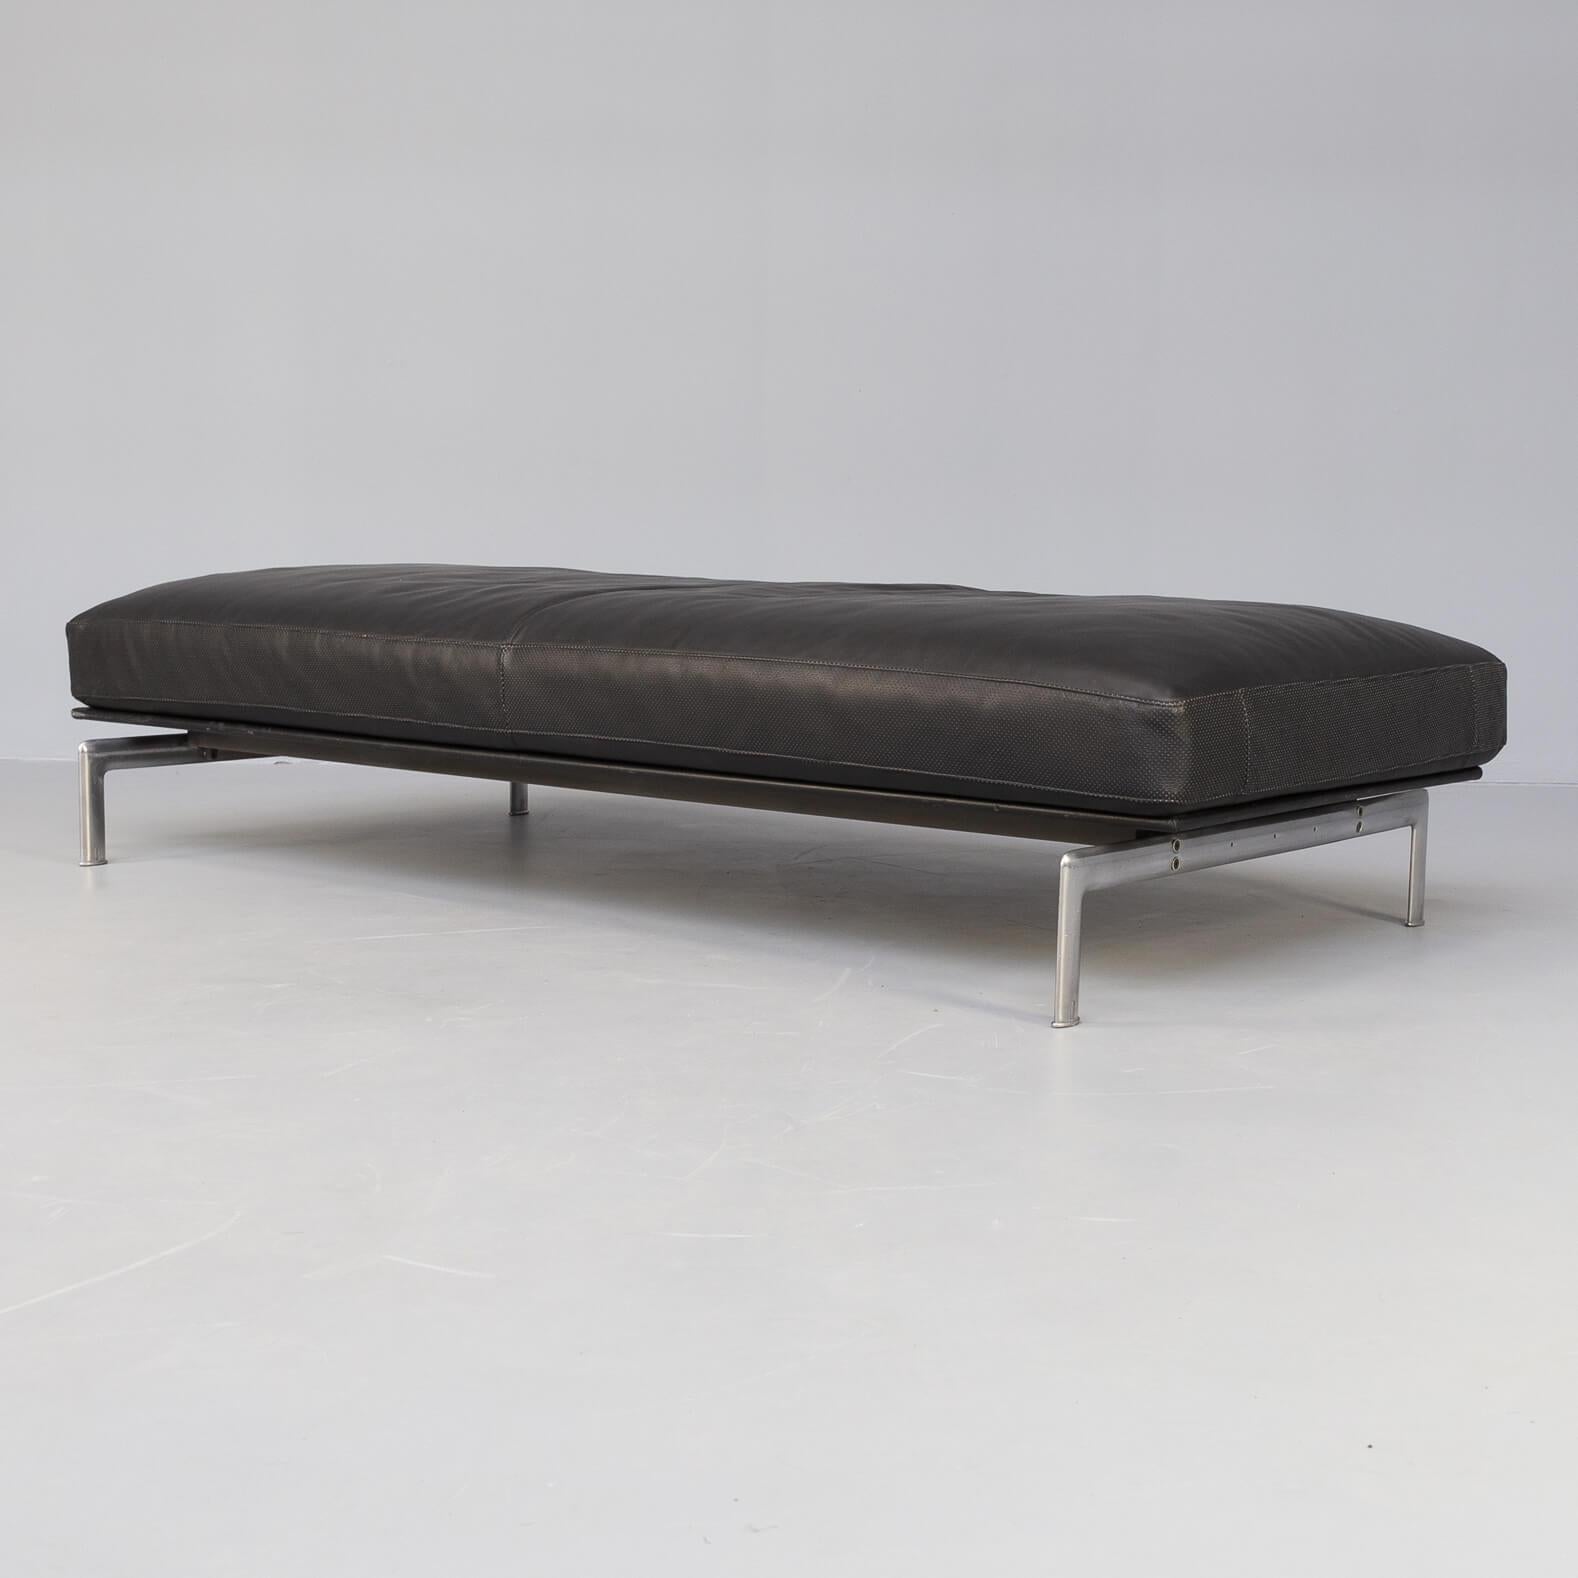 80s Antonio Citterio and Paolo Nava Black Leather “Diesis” Daybed for B&B Italia For Sale 1